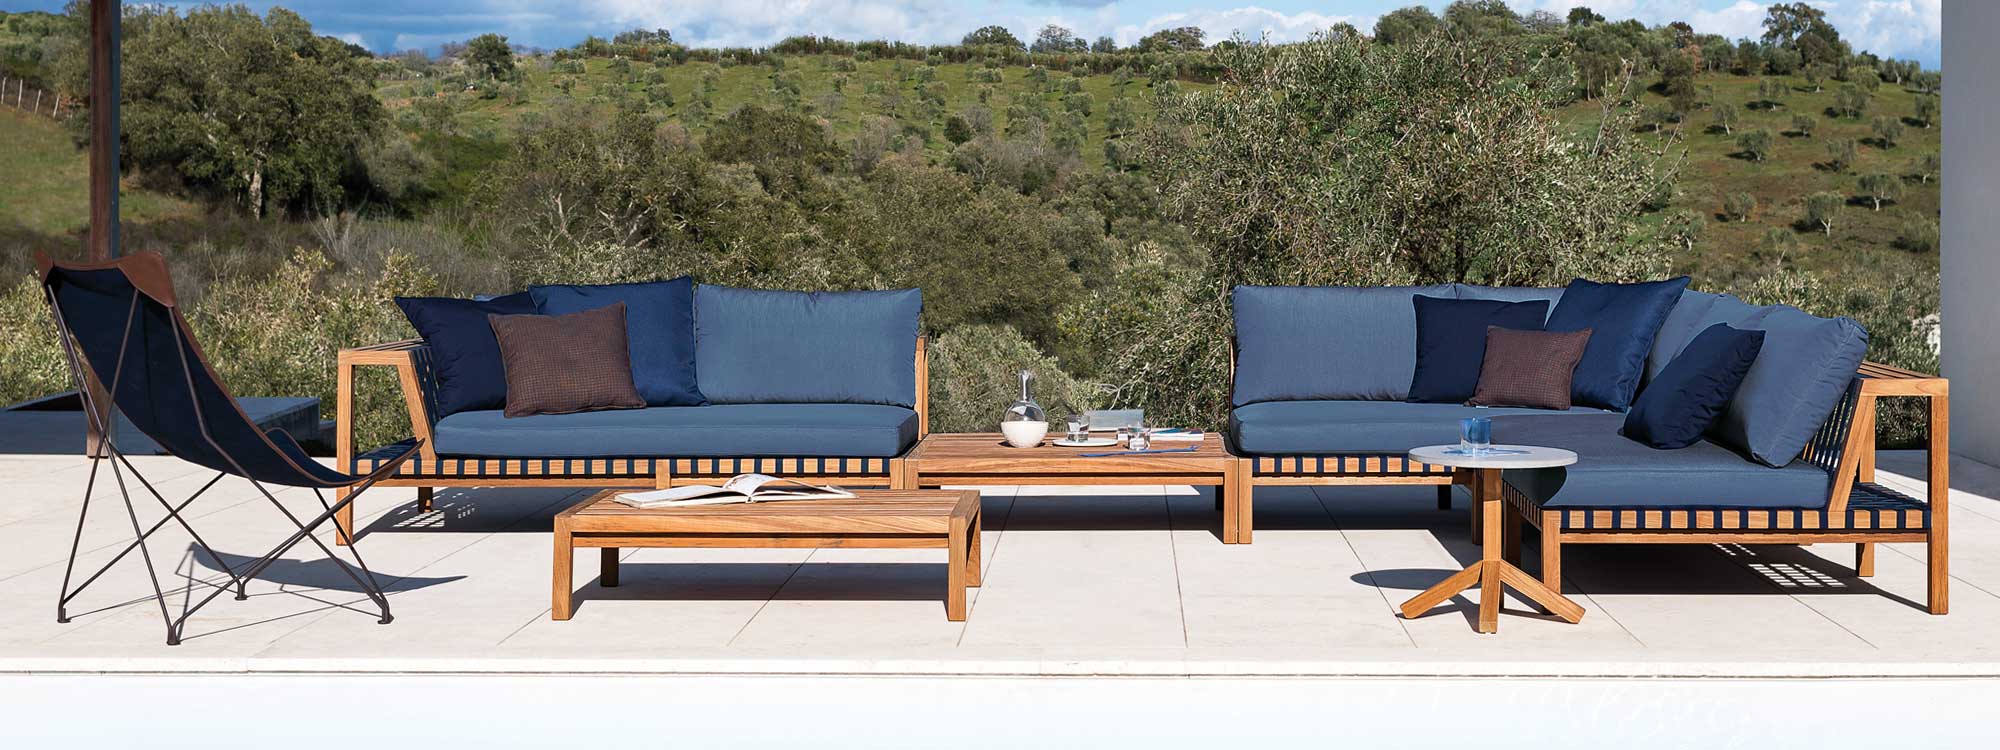 Network teak corner sofa with Blue webbing and Blue cushions with olive orchard in background